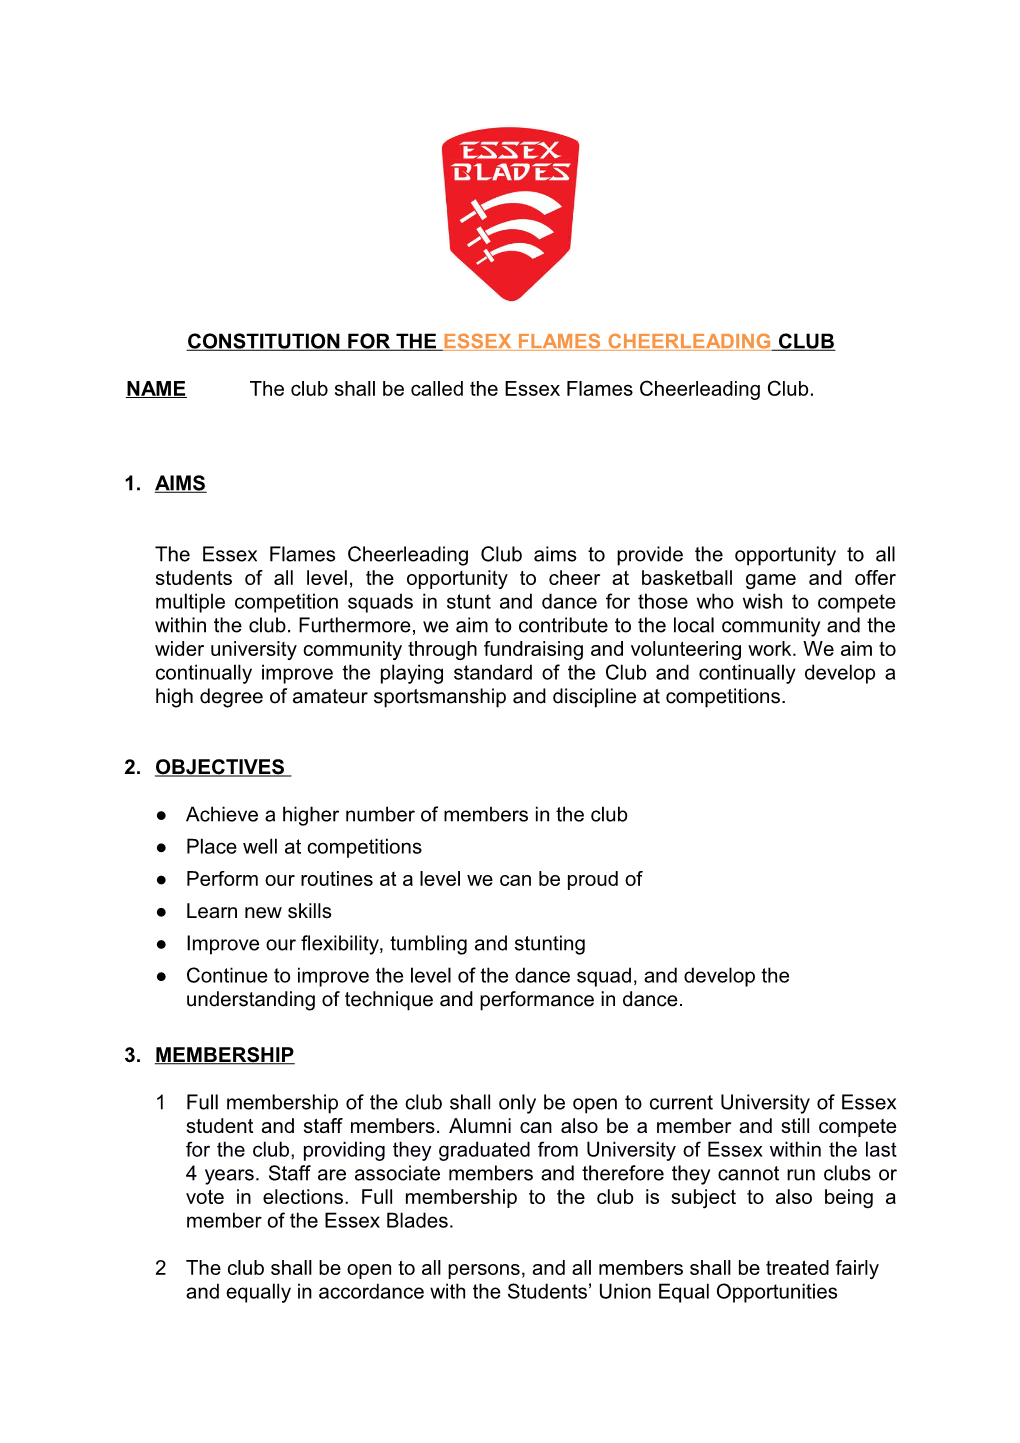 Constitution for the Essex Flames Cheerleading Club